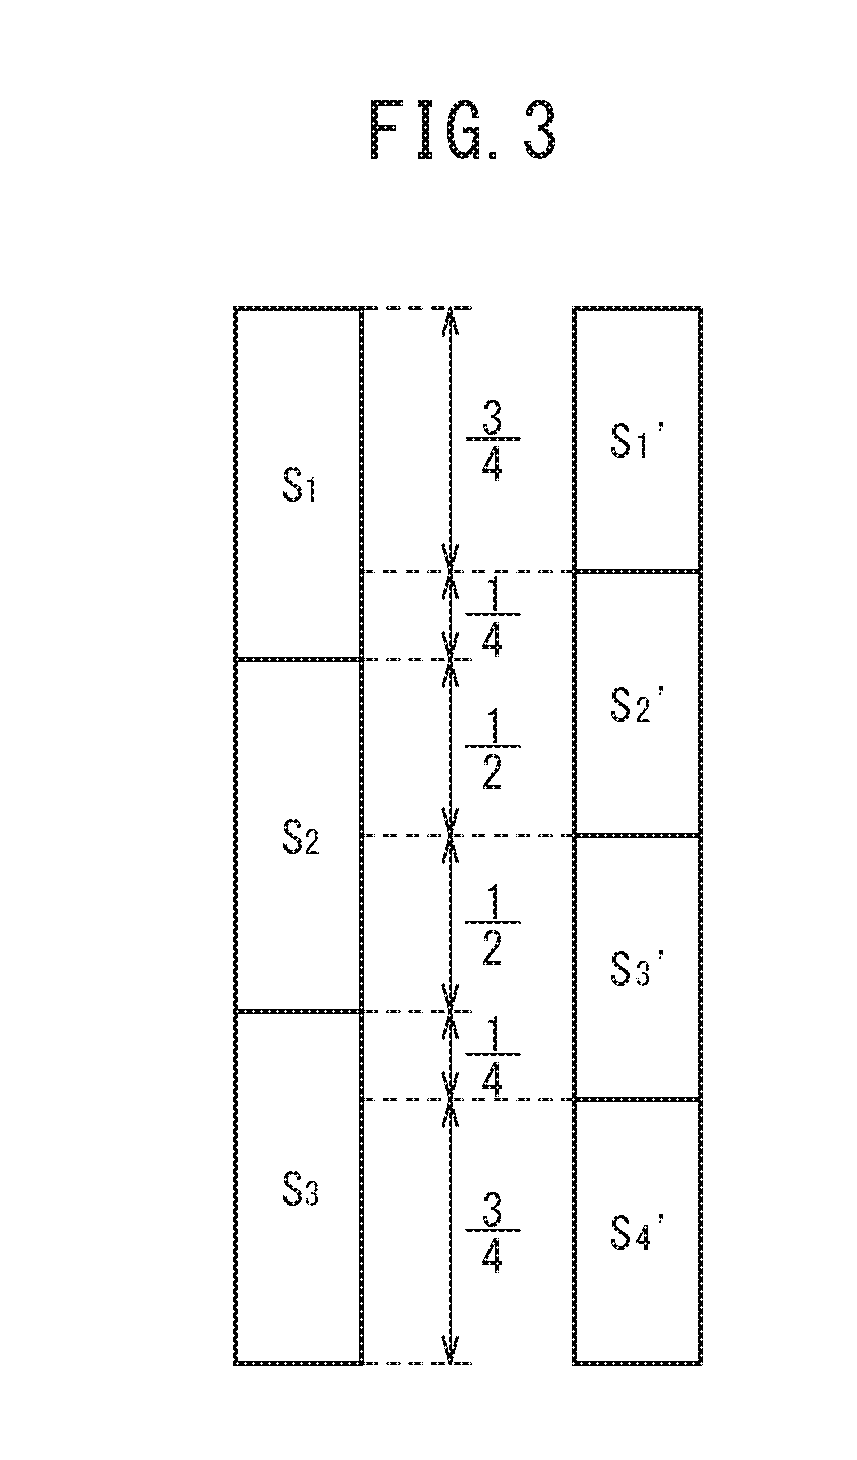 Motor control device, control system, and motor control method